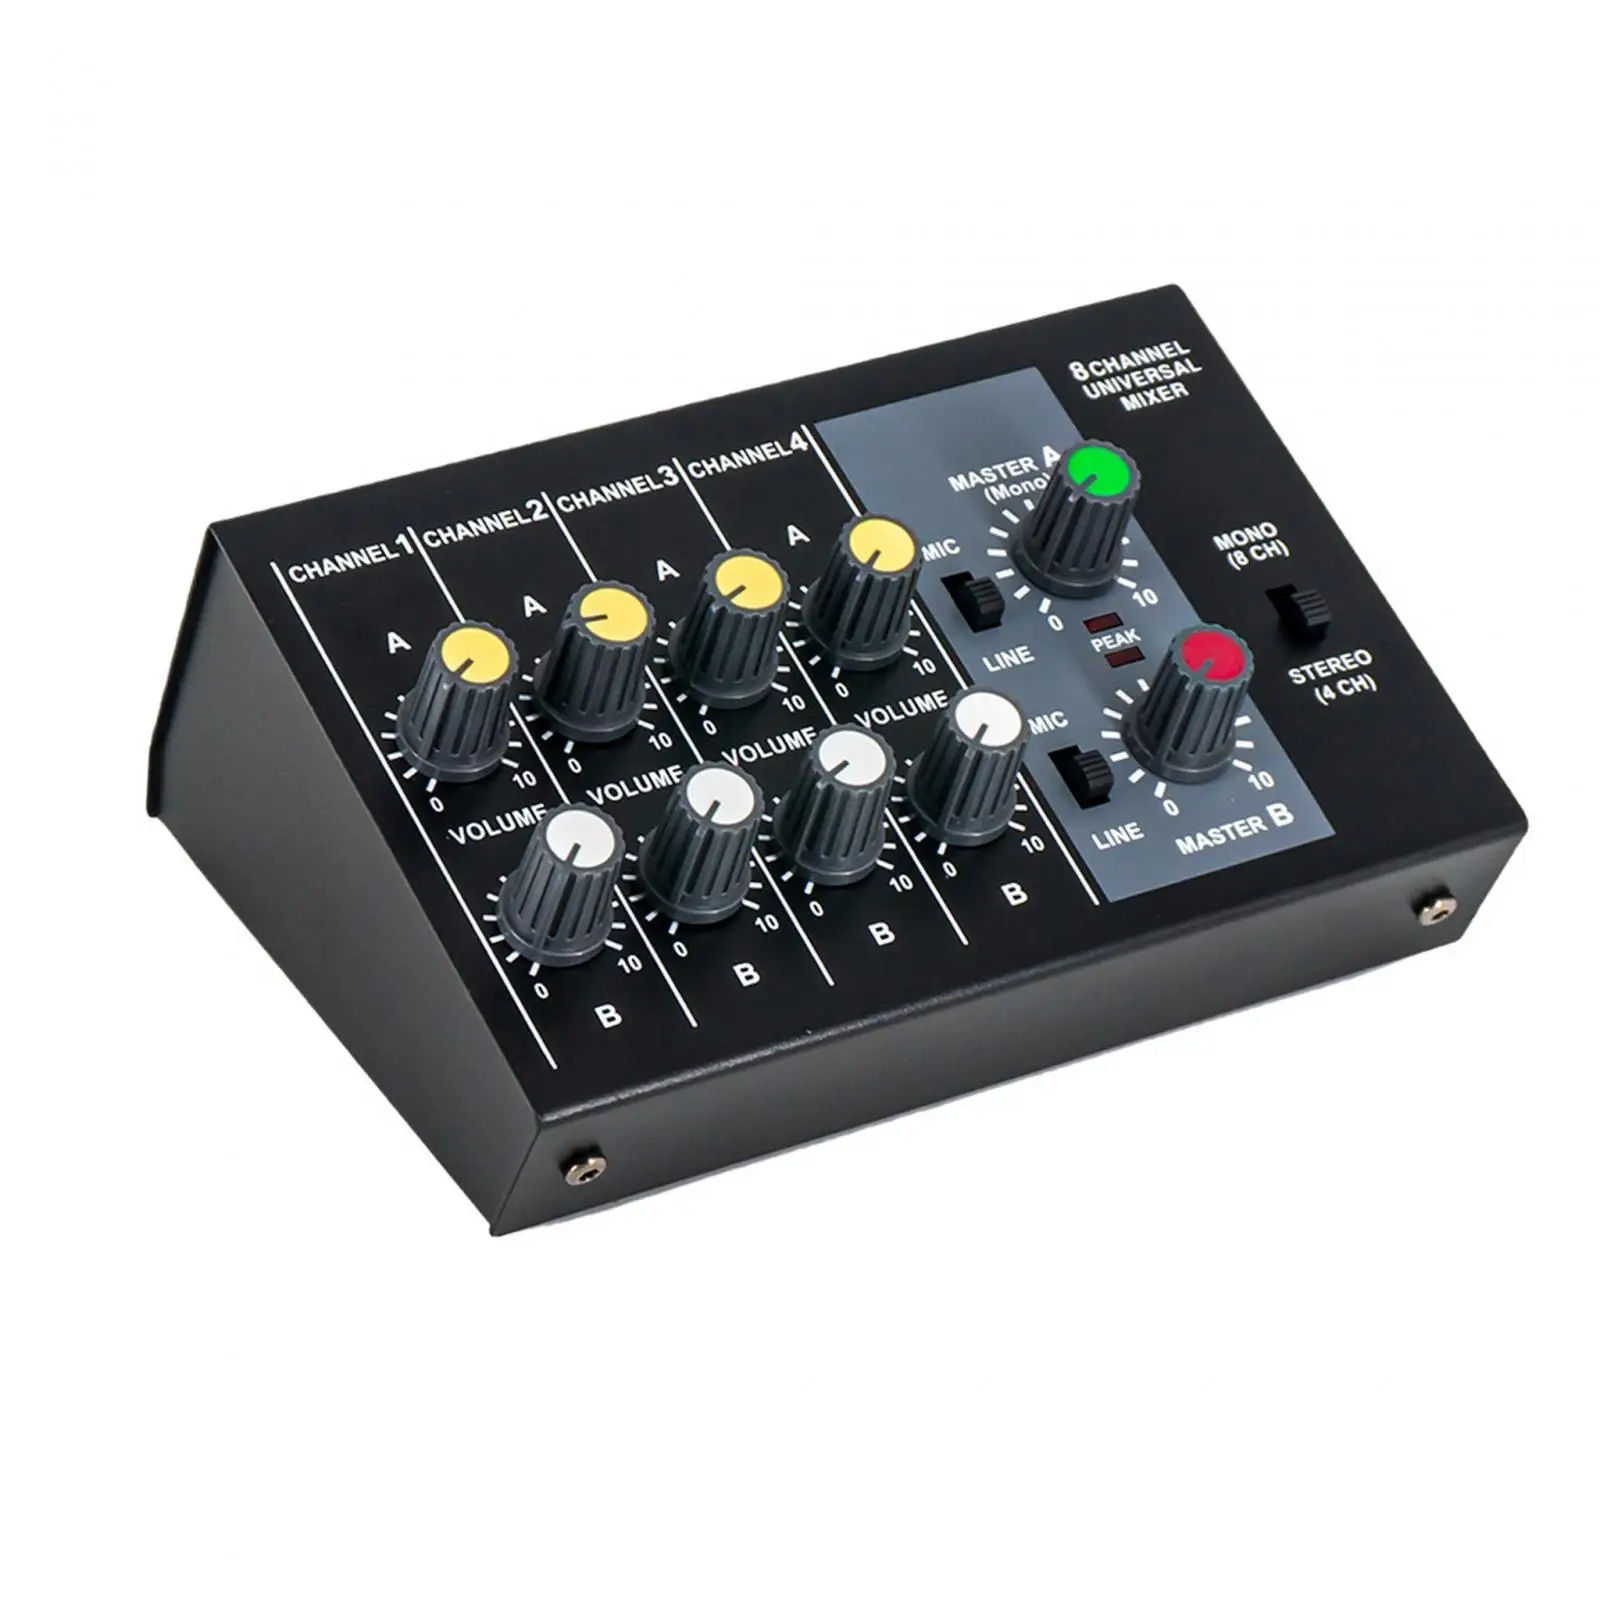 Audio Mixer Low Noise Independent Volume Control 8 Channel Input Line Mixer Sound Mixing Console for Guitars Keyboards Bass